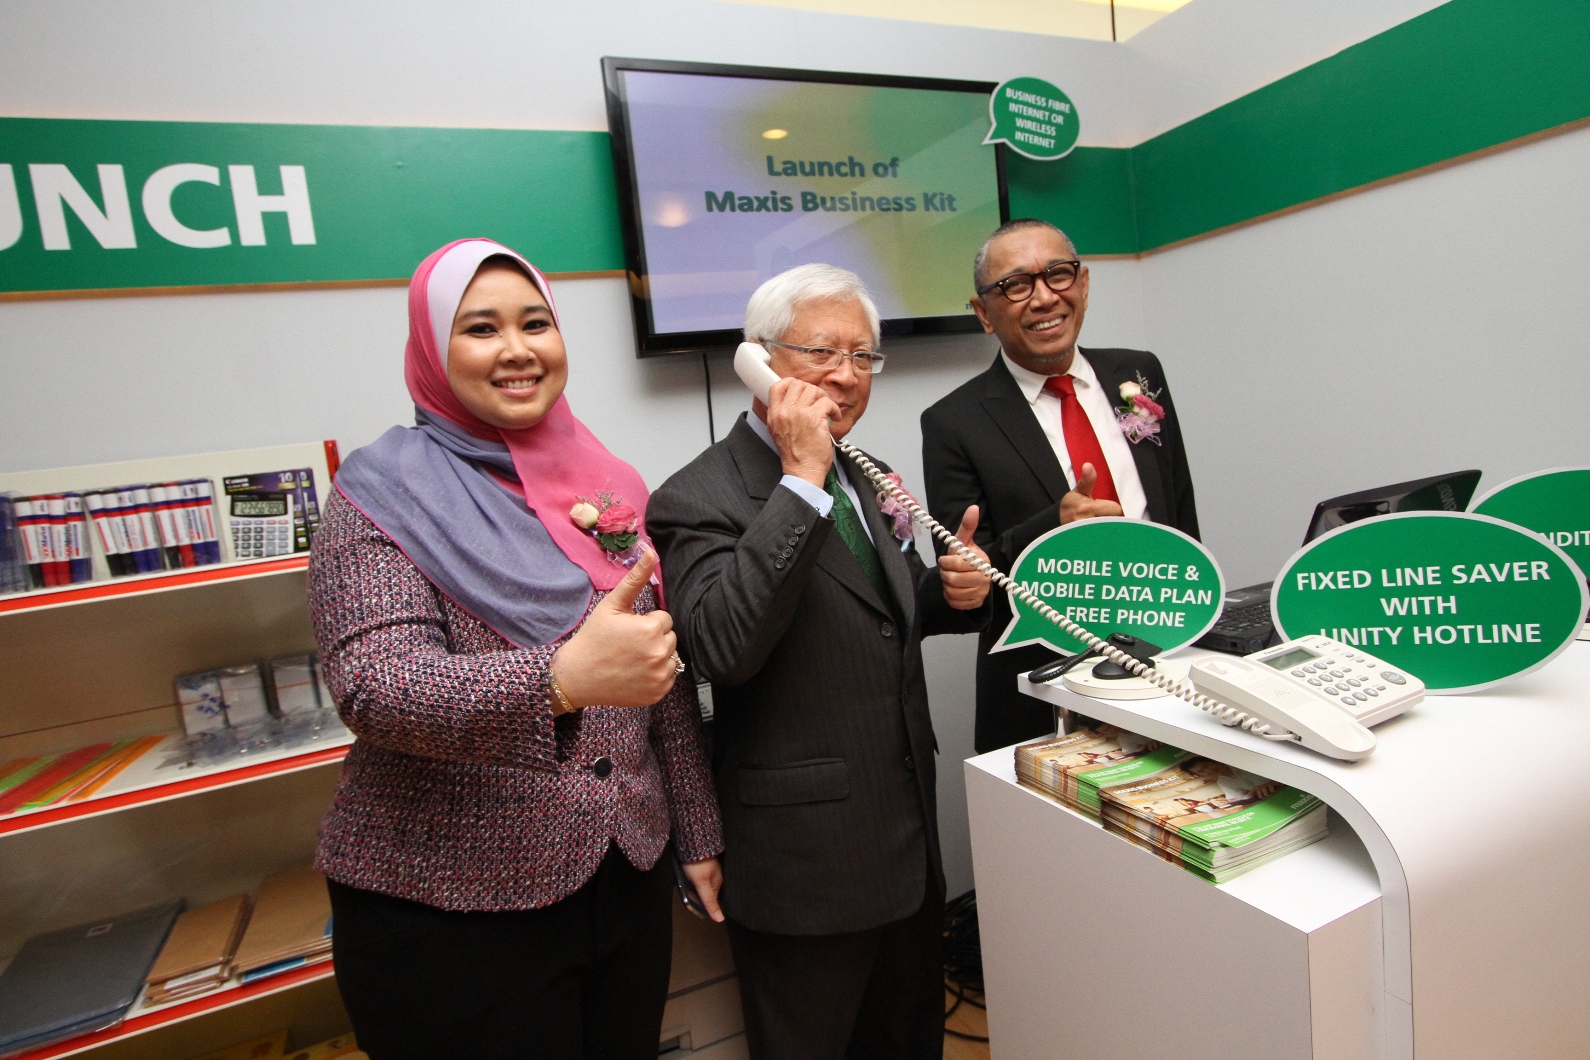 Maxis eyes more SMEs with Business Kit launch